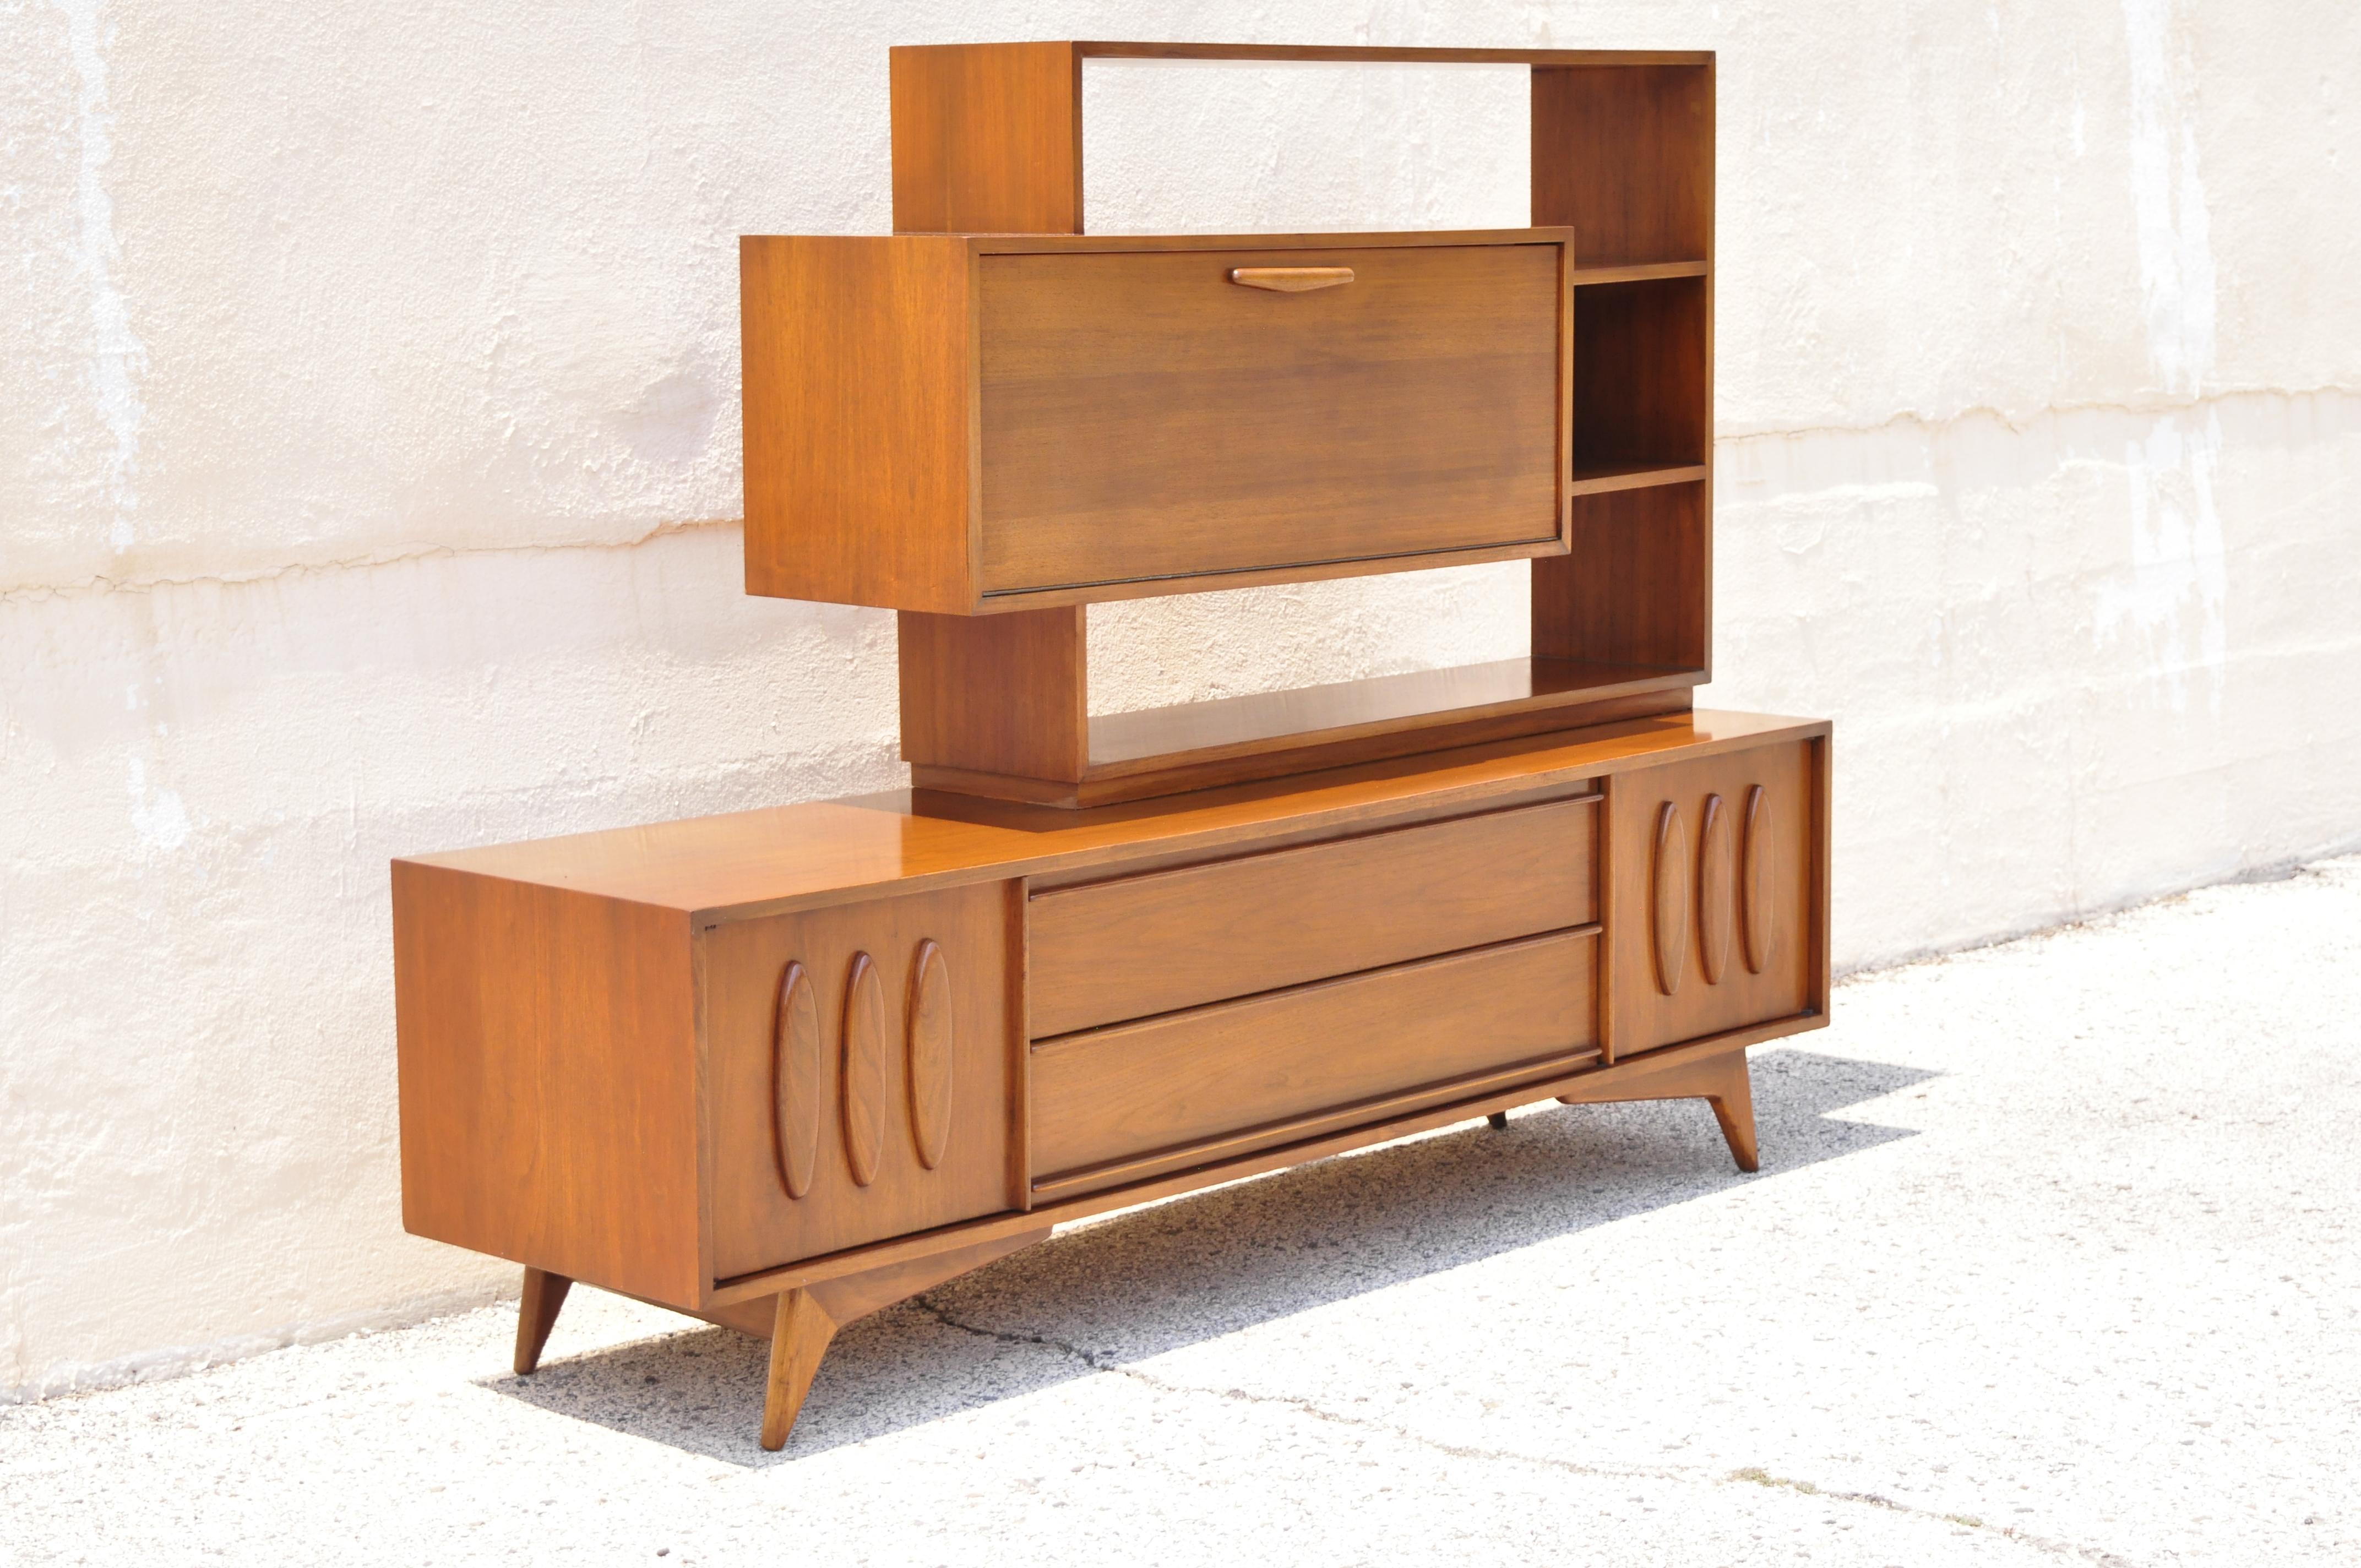 Mid-Century Modern Atomic Era walnut floating shelf bar credenza cabinet sideboard. Item features fall front mirrored bar, floating shelves, beautiful wood grain, 2 part construction, 2 swing doors, 2 dovetailed drawers, tapered legs, clean